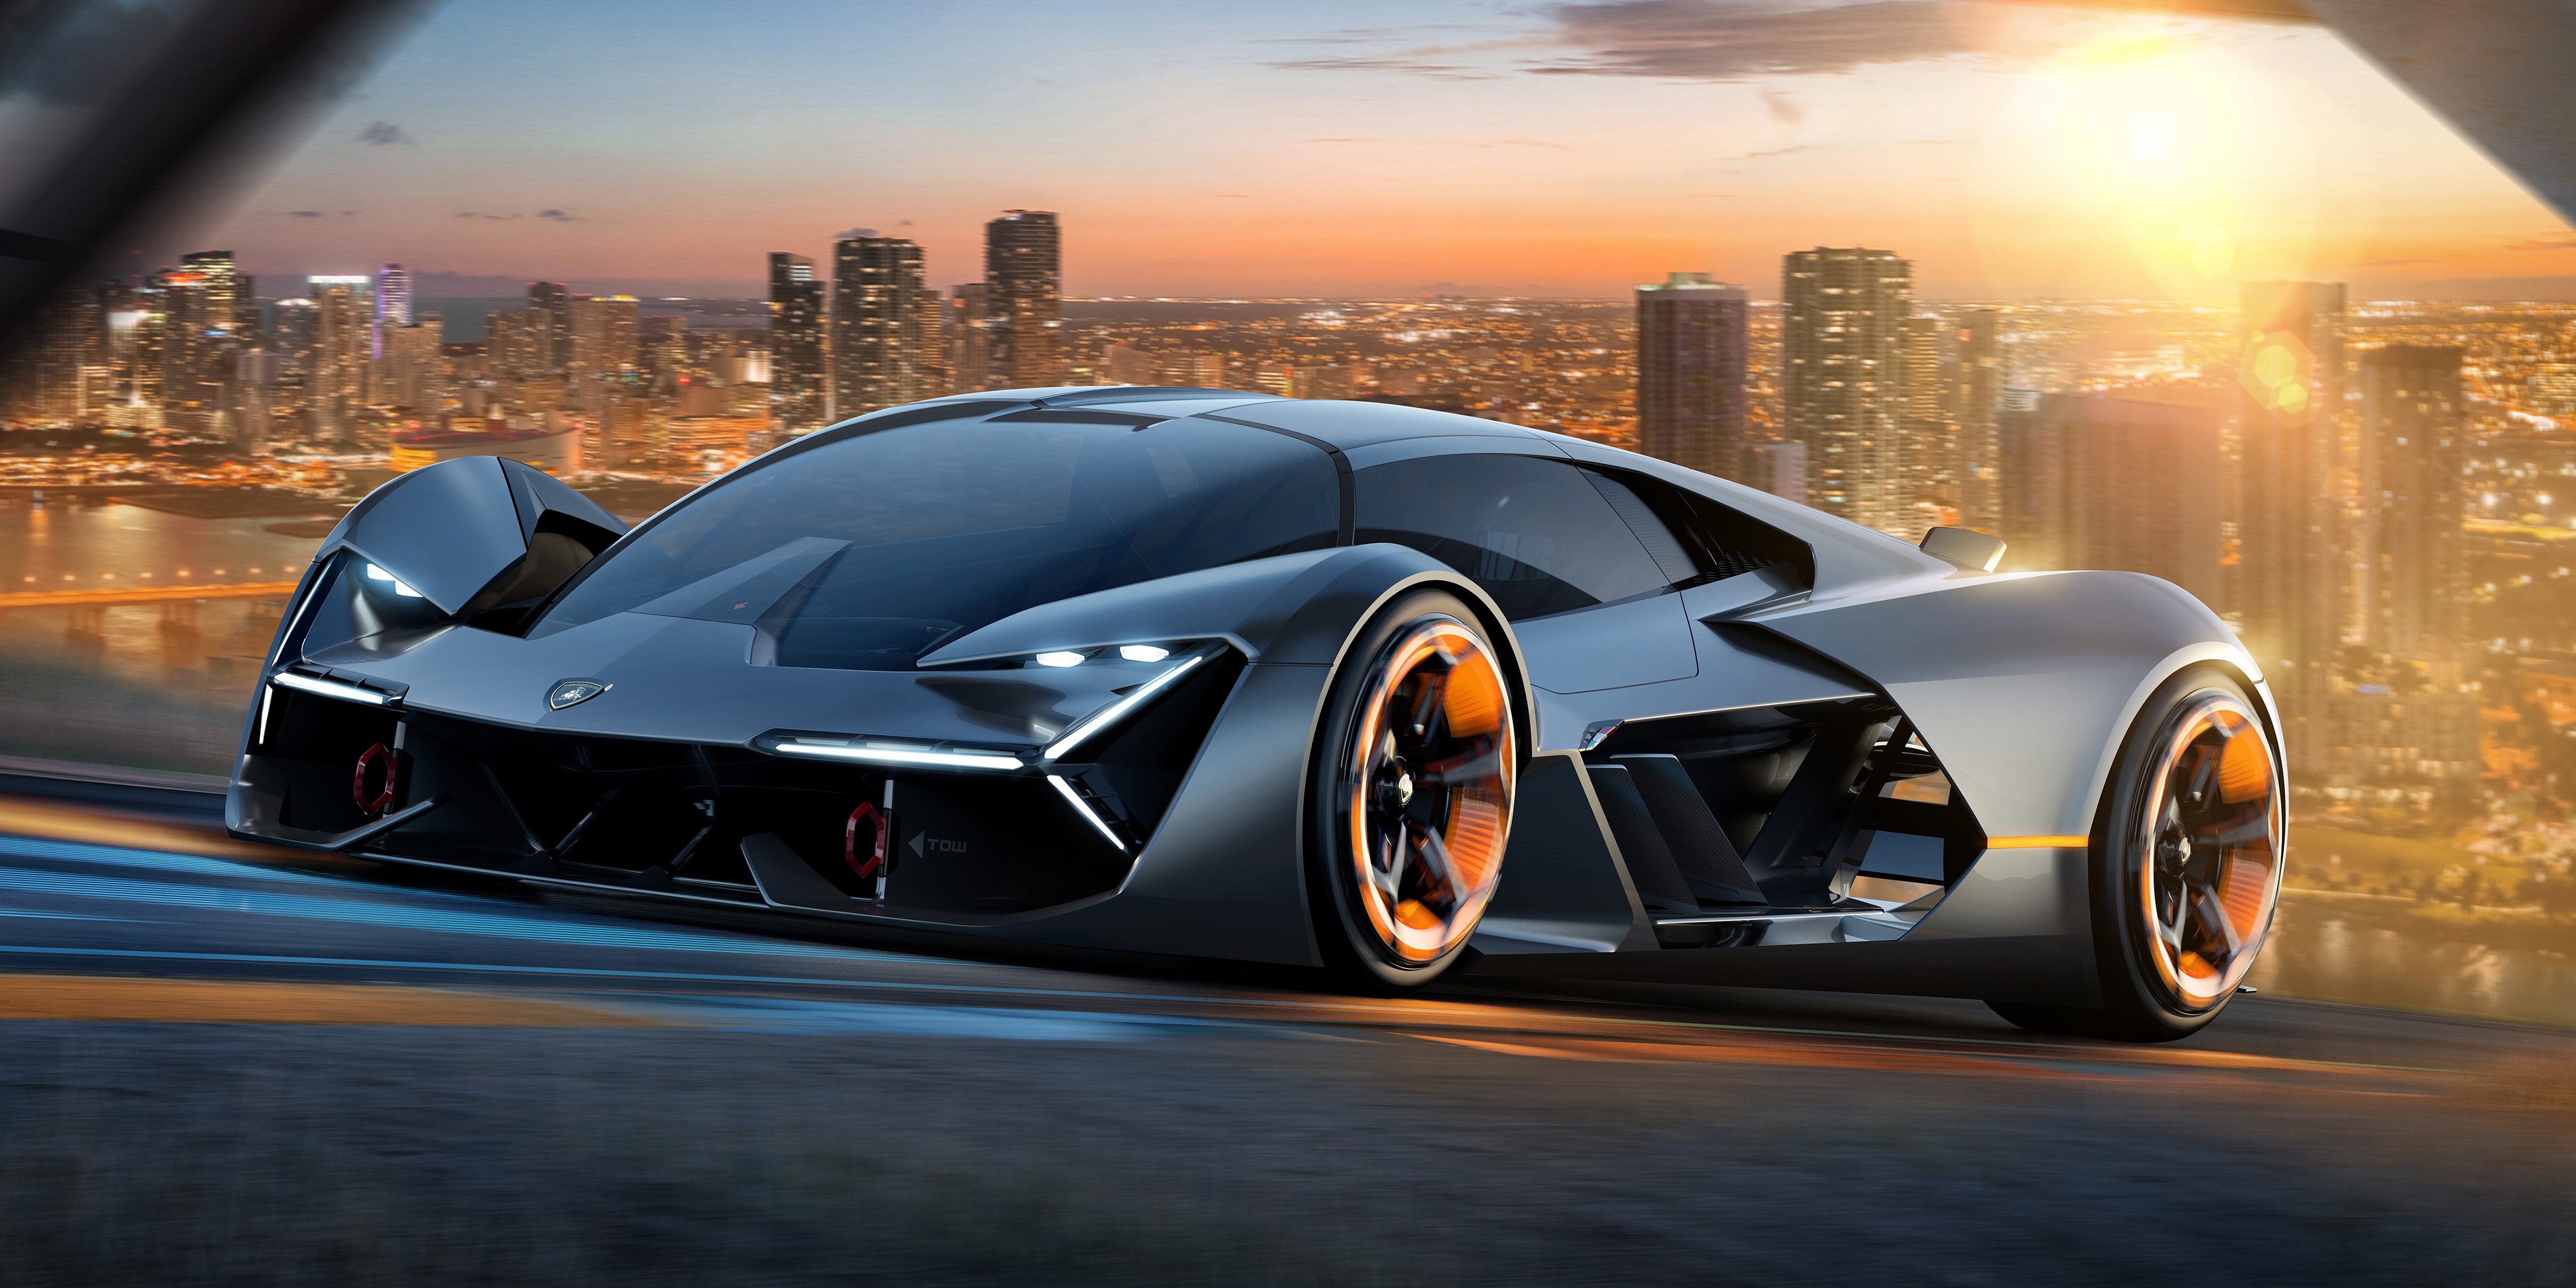 Lamborghini thinks Tesla is bluffing with the Roadster, doesn't see battery  tech enabling all-electric supercars | Electrek